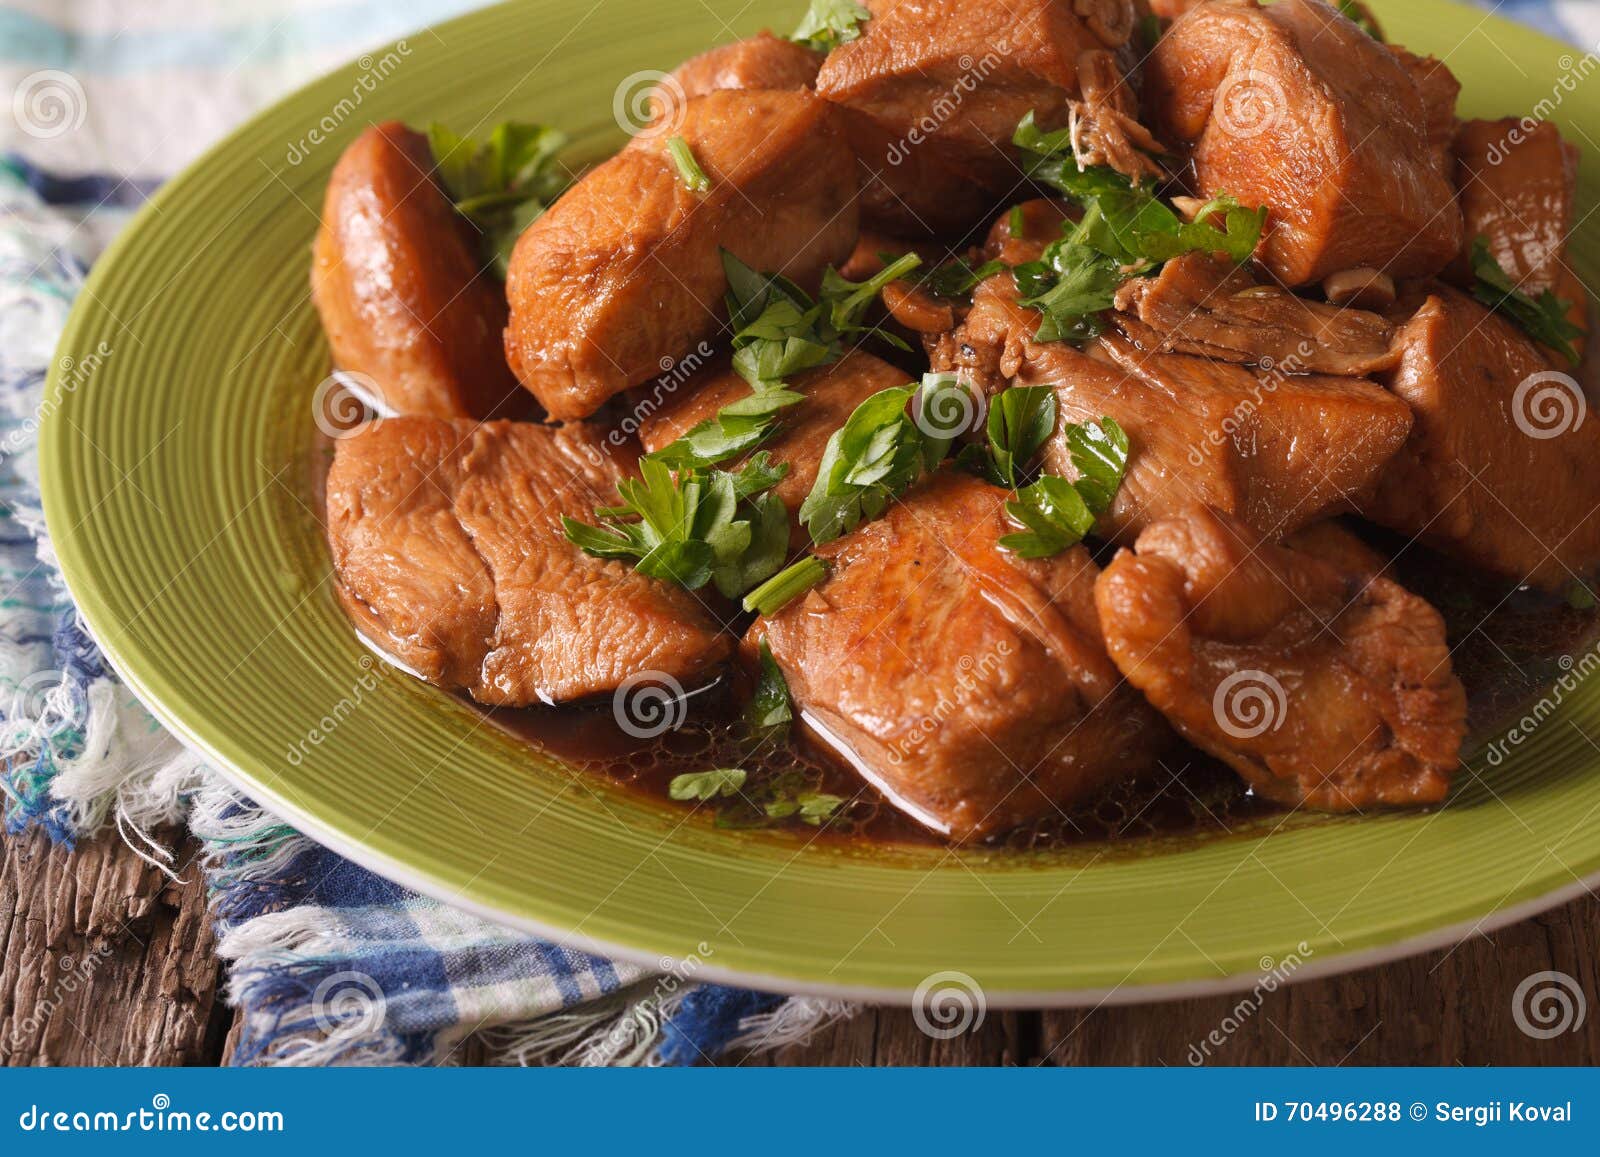 delicious filipino food: adobo chicken with herbs close-up. horizontal